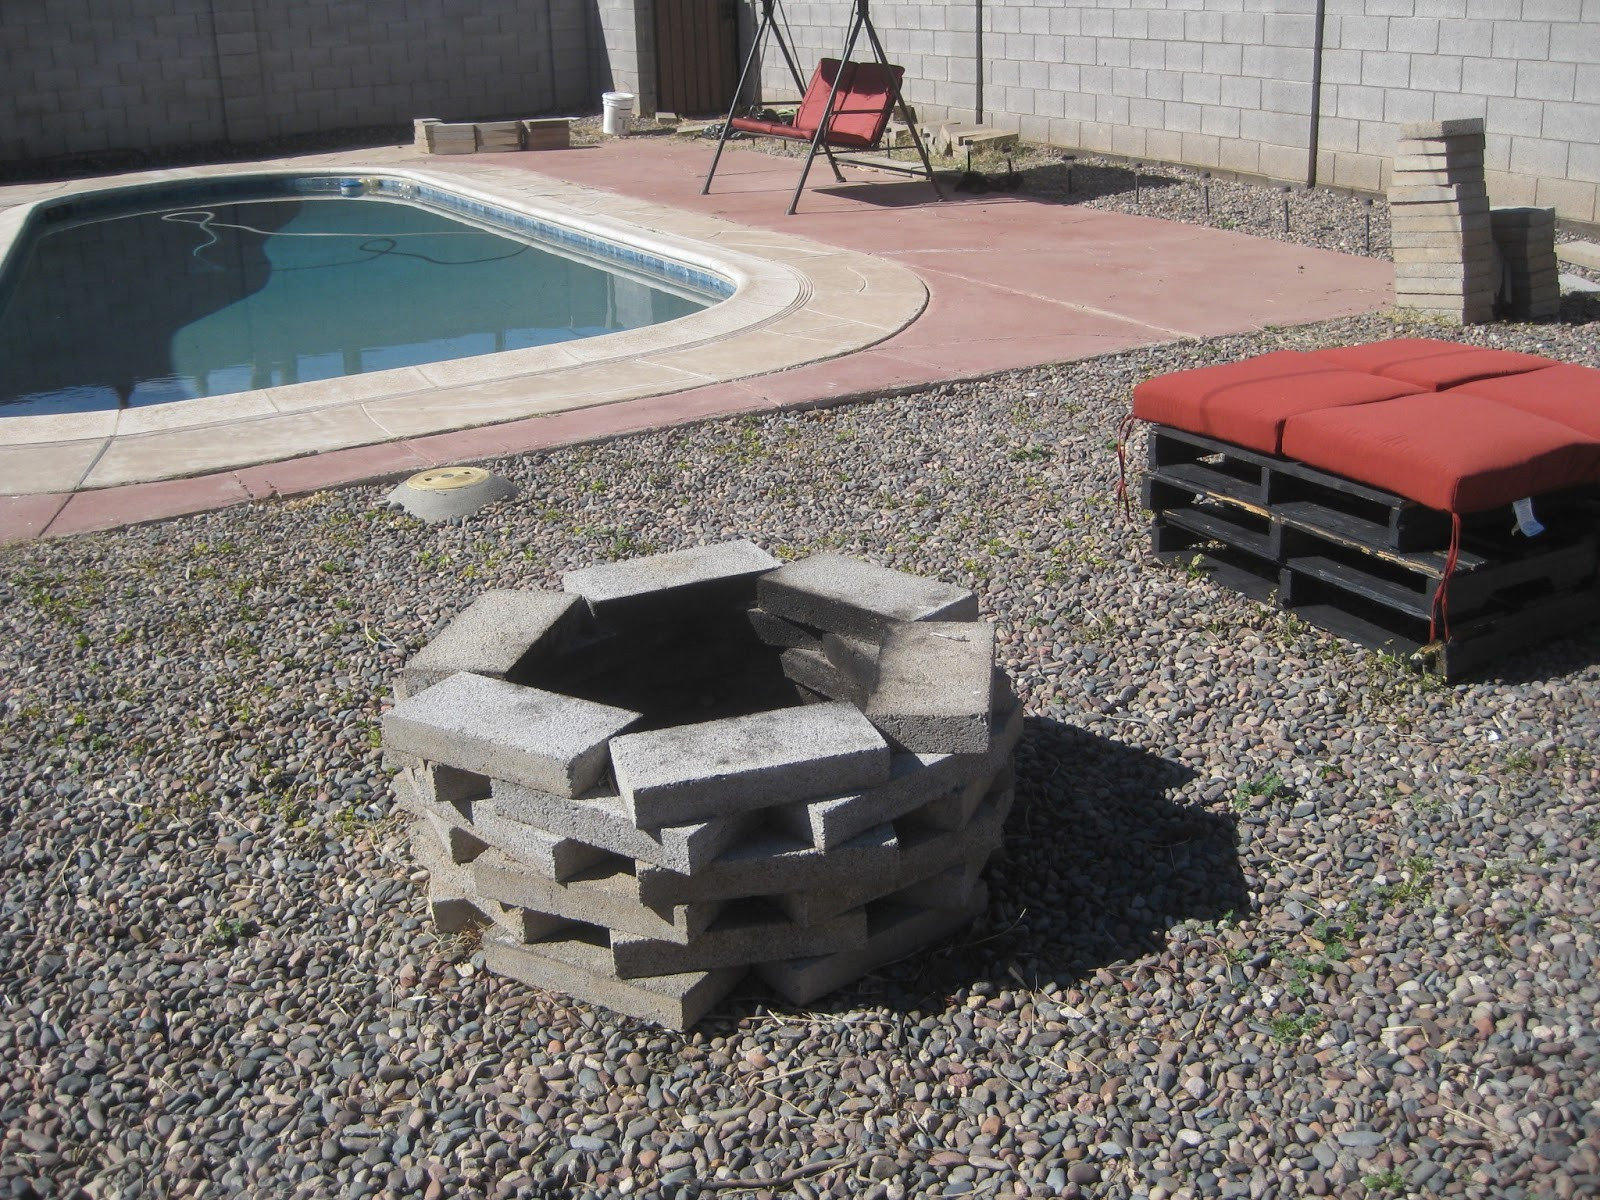 Paving Stones Fire Pit
 The Home Owner s Blog How To Build A Fire Pit From Paver